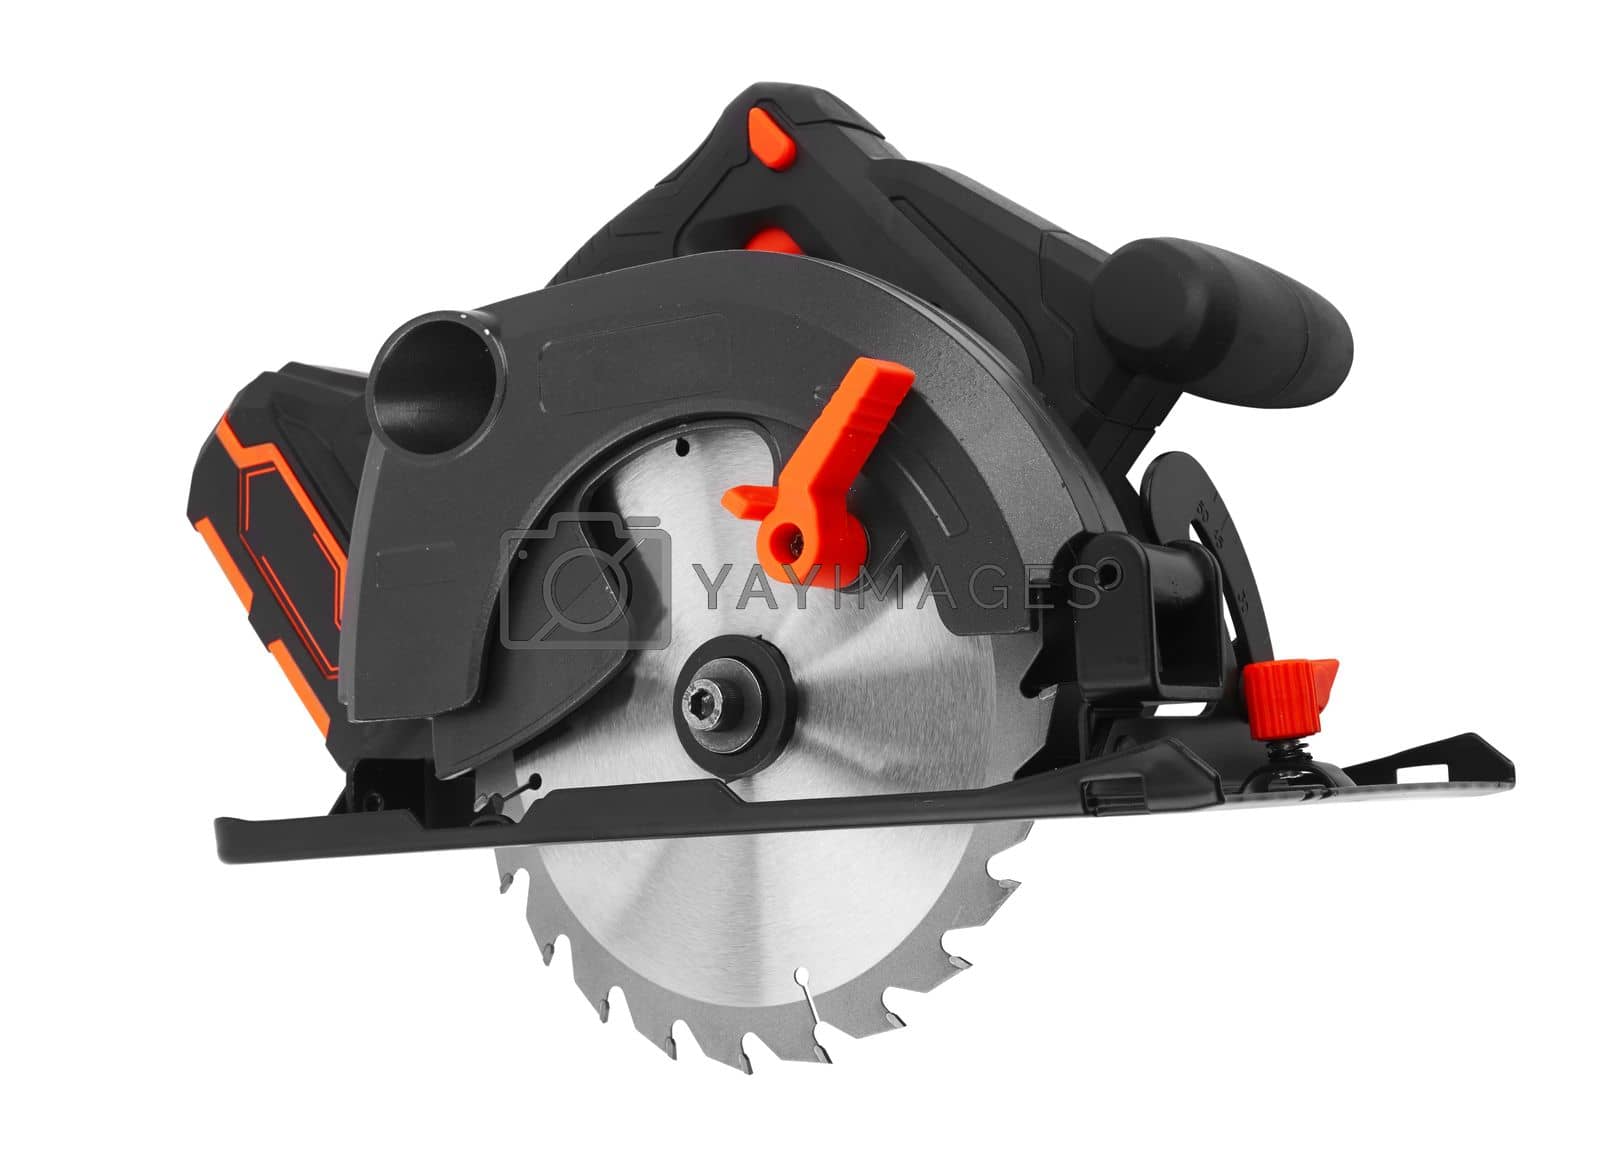 Royalty free image of Power tools circular saw  by pioneer111